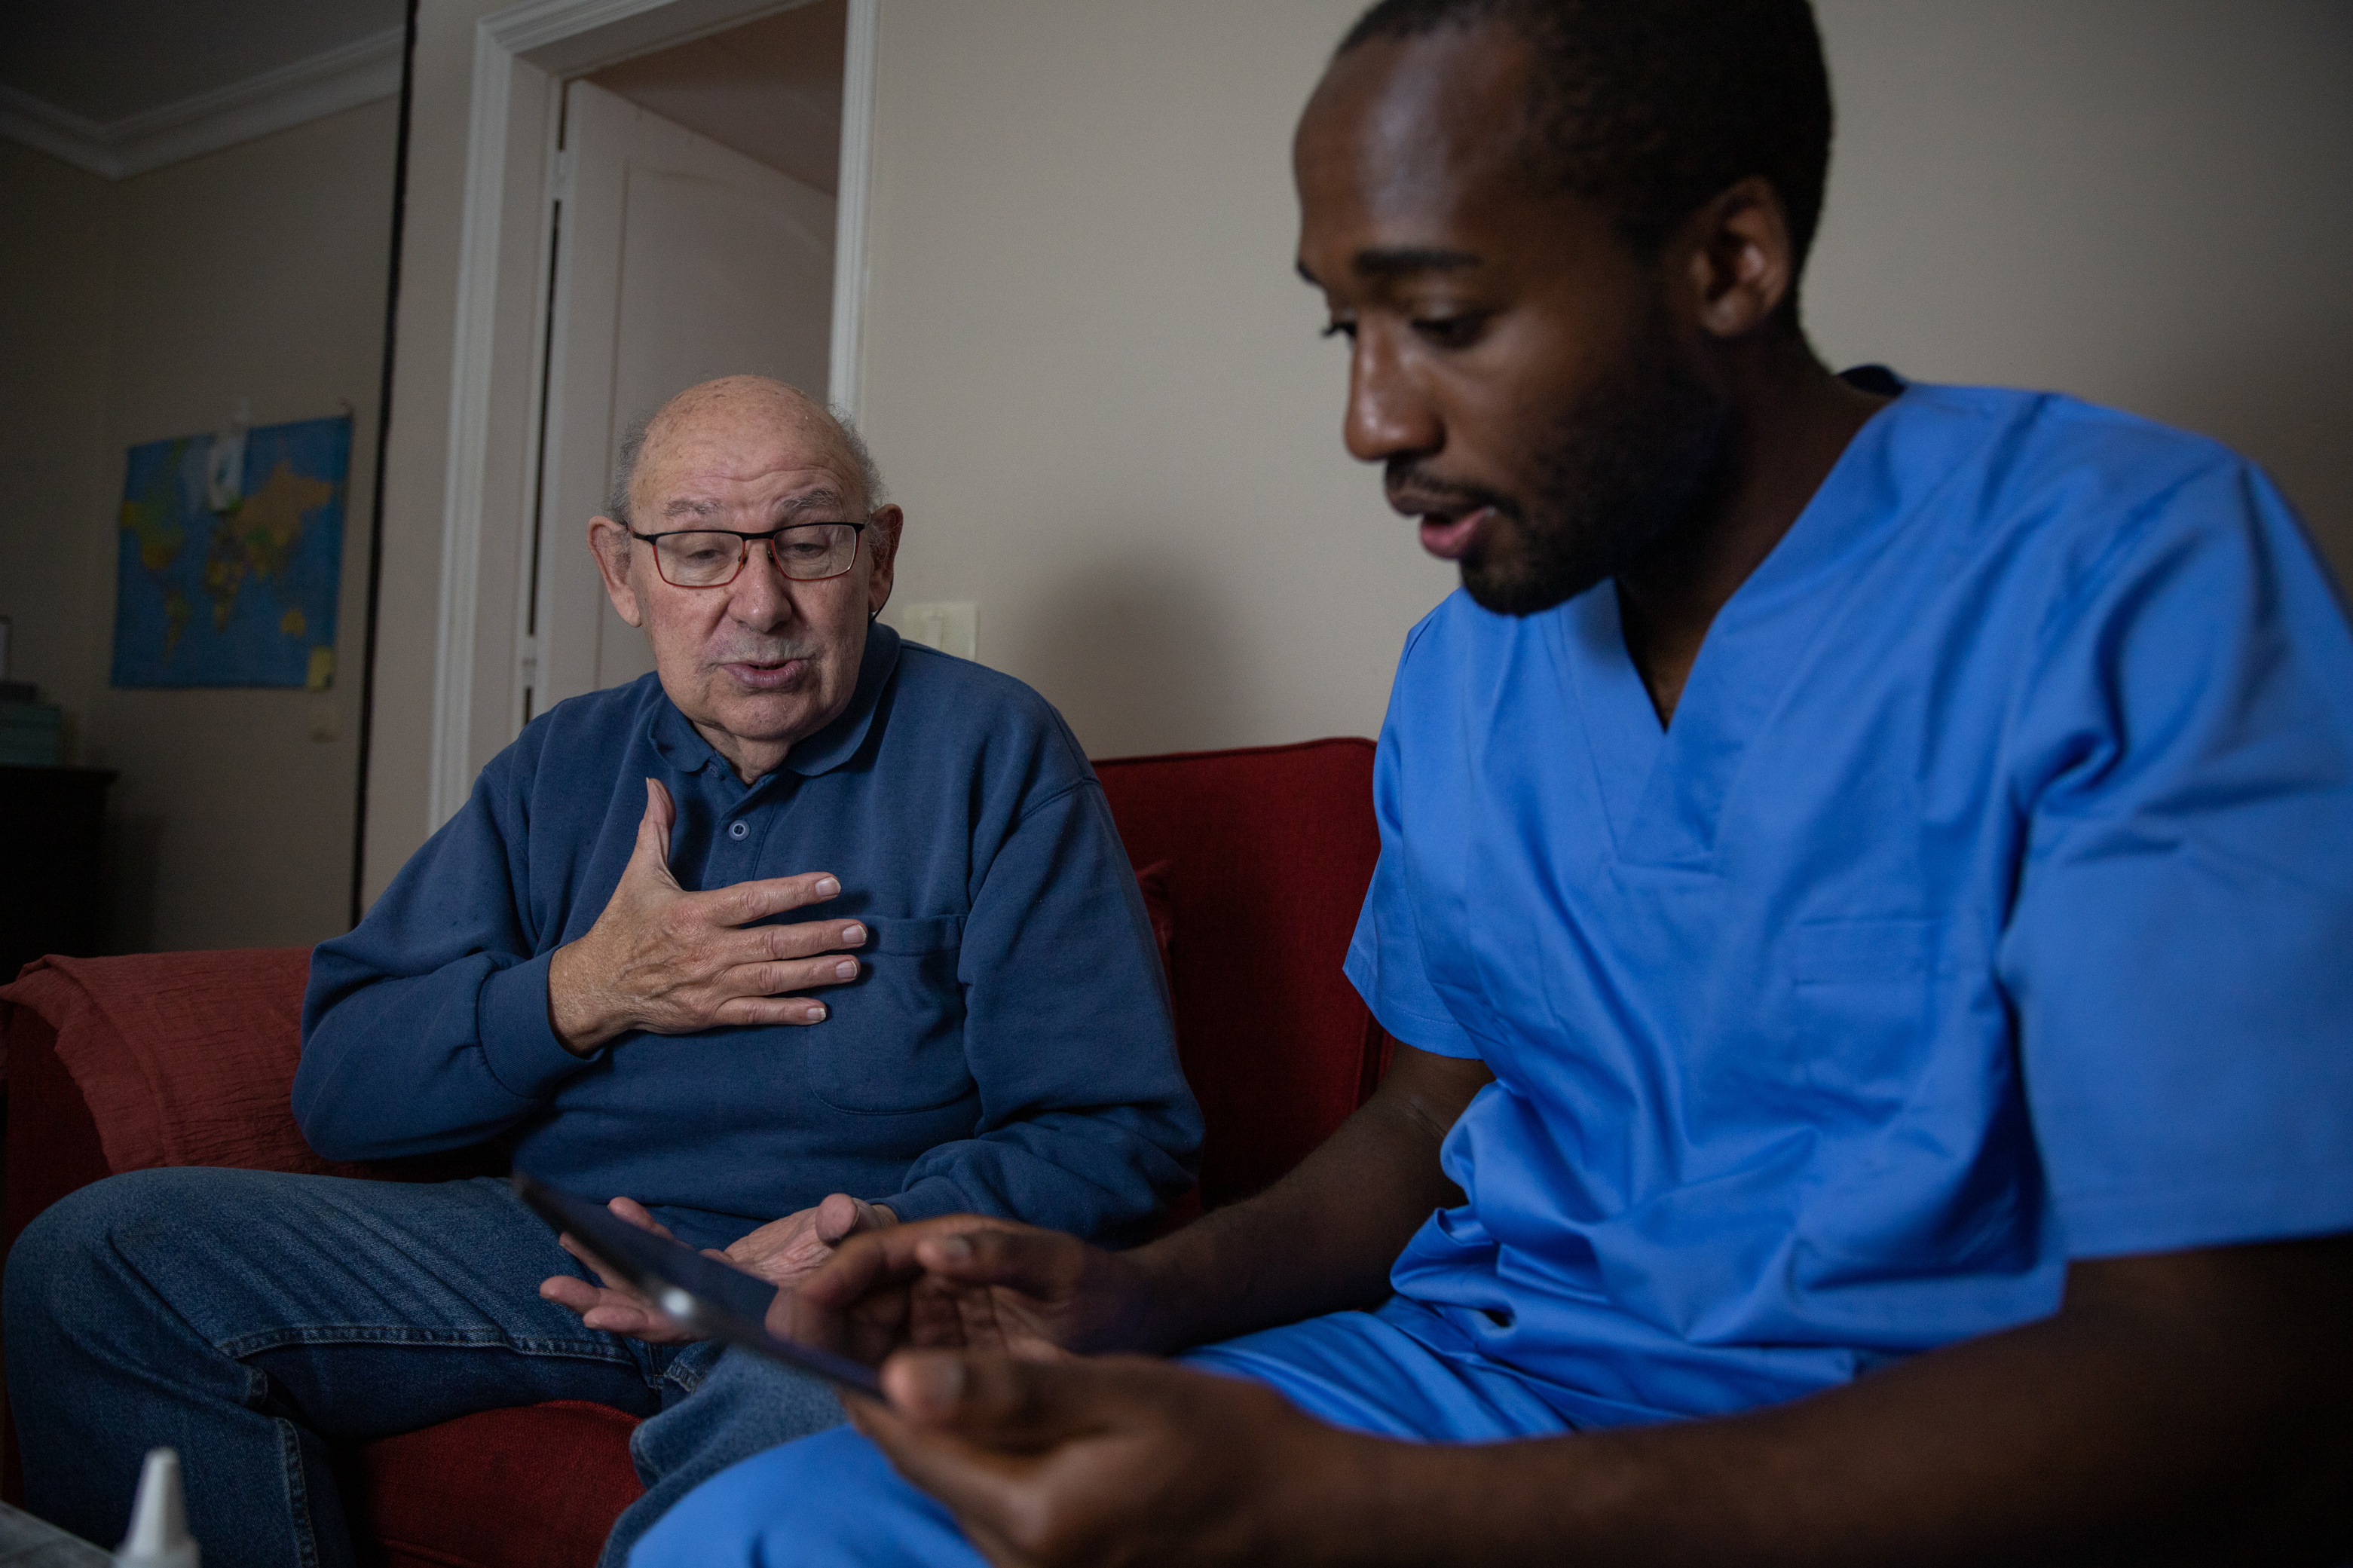 An elderly patient talks to medical professional during a home doctor visit.